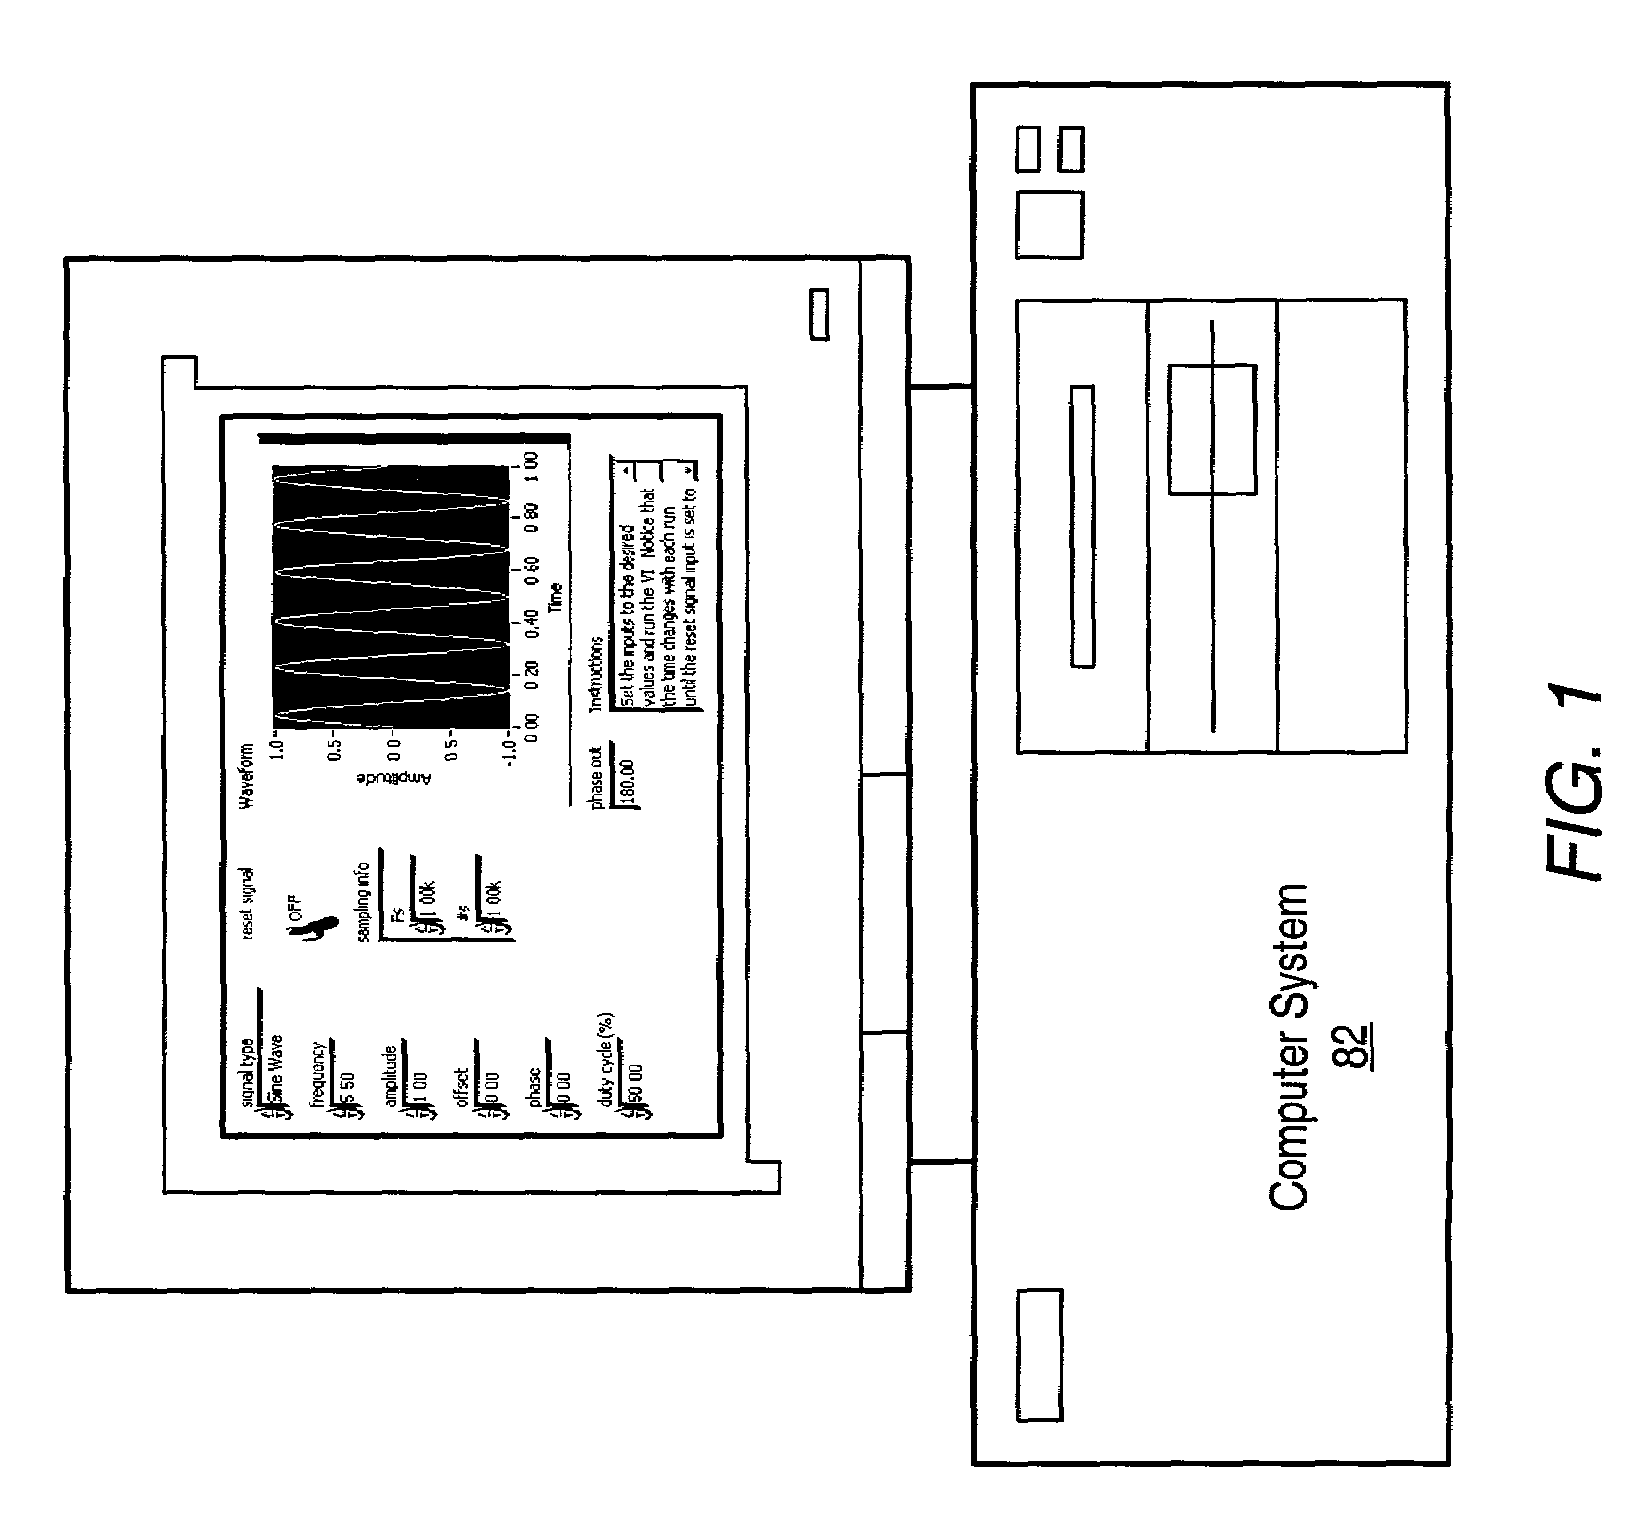 System and method for enabling a graphical program to respond to user interface events